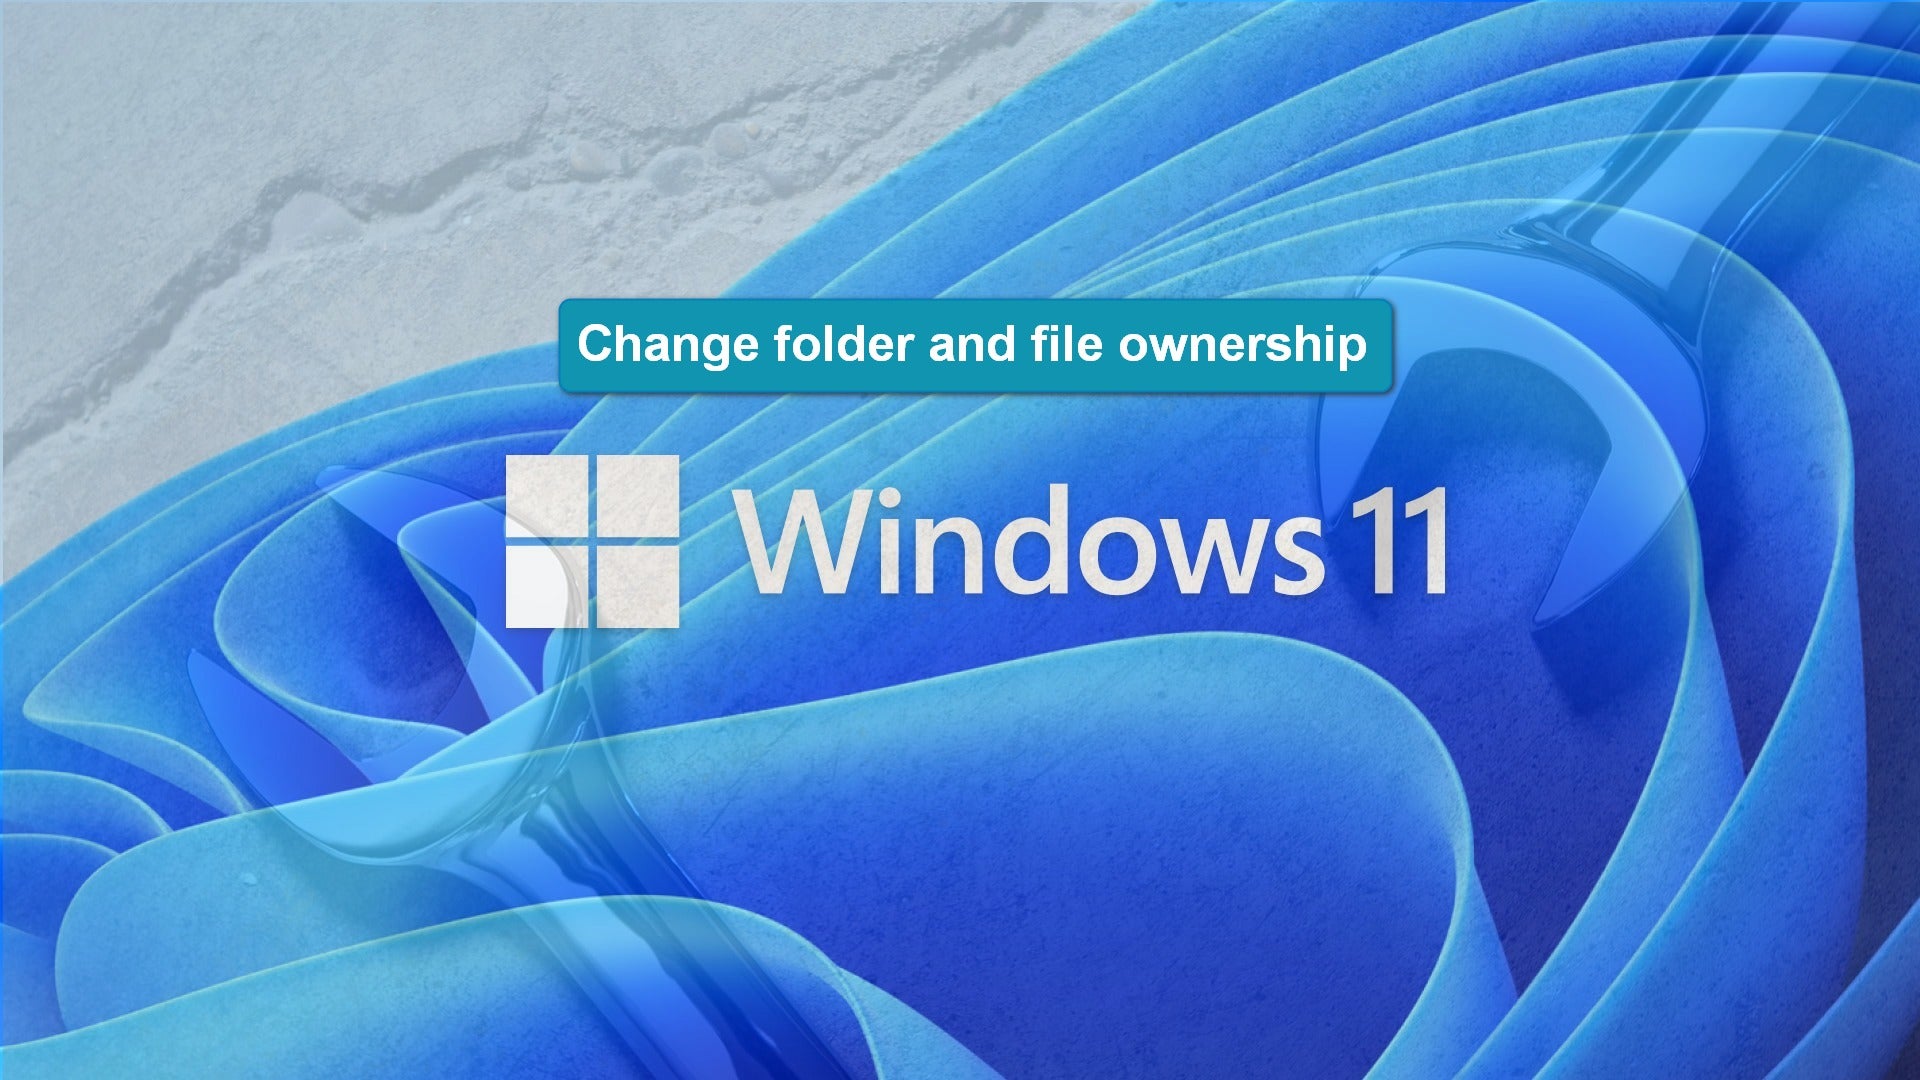 How to change ownership and control of files and folders in Windows 11